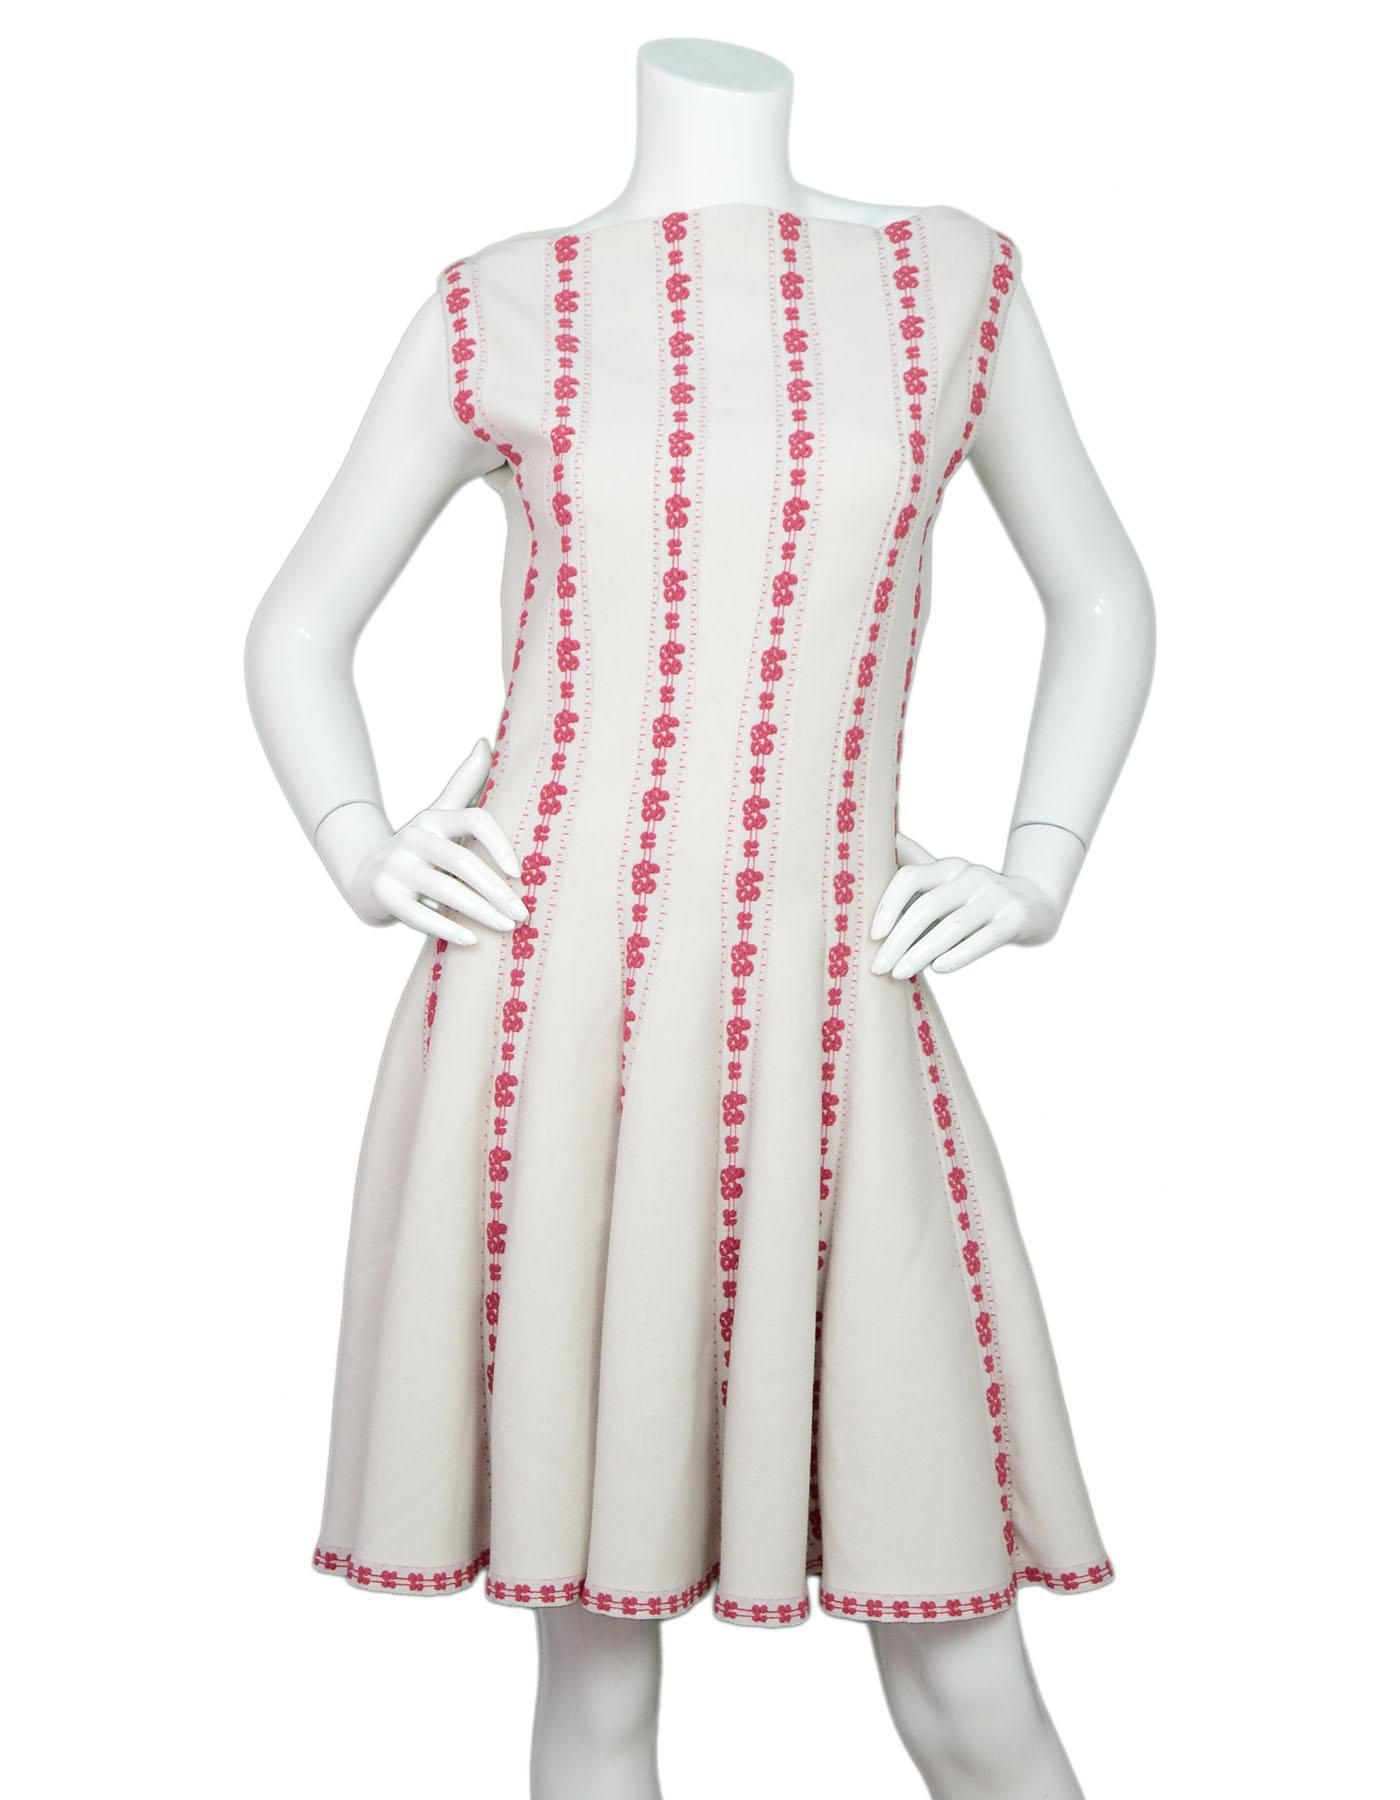 Alaia Cream & Pink Boatneck Fit & Flare Dress Sz FR44

Made in: Italy
Color: Cream, pink
Composition: 77% wool, 9% nylon, 12% polyester, 2% elastane
Lining: None
Closure/opening: Back center zip up
Overall Condition: Excellent pre-owned condition